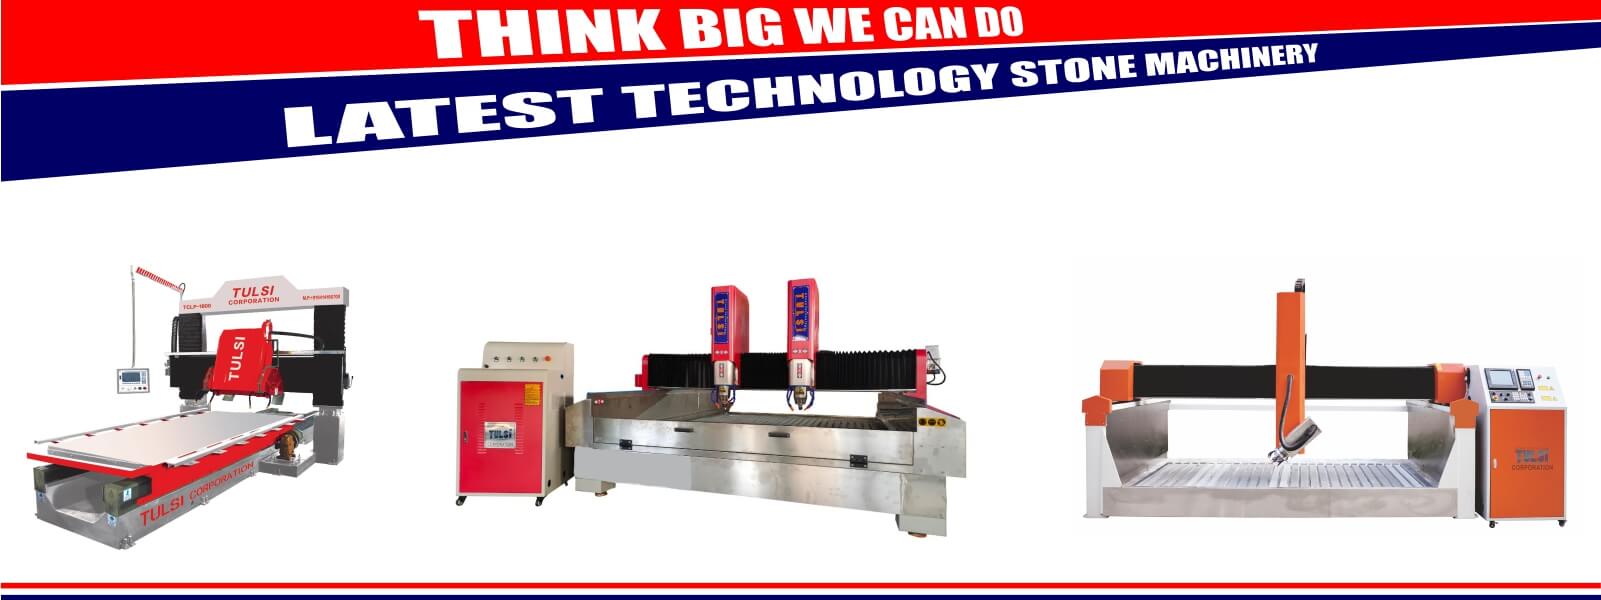 Multifunctional Polishing And Cutting Machine Manufacturer & Dealer In India